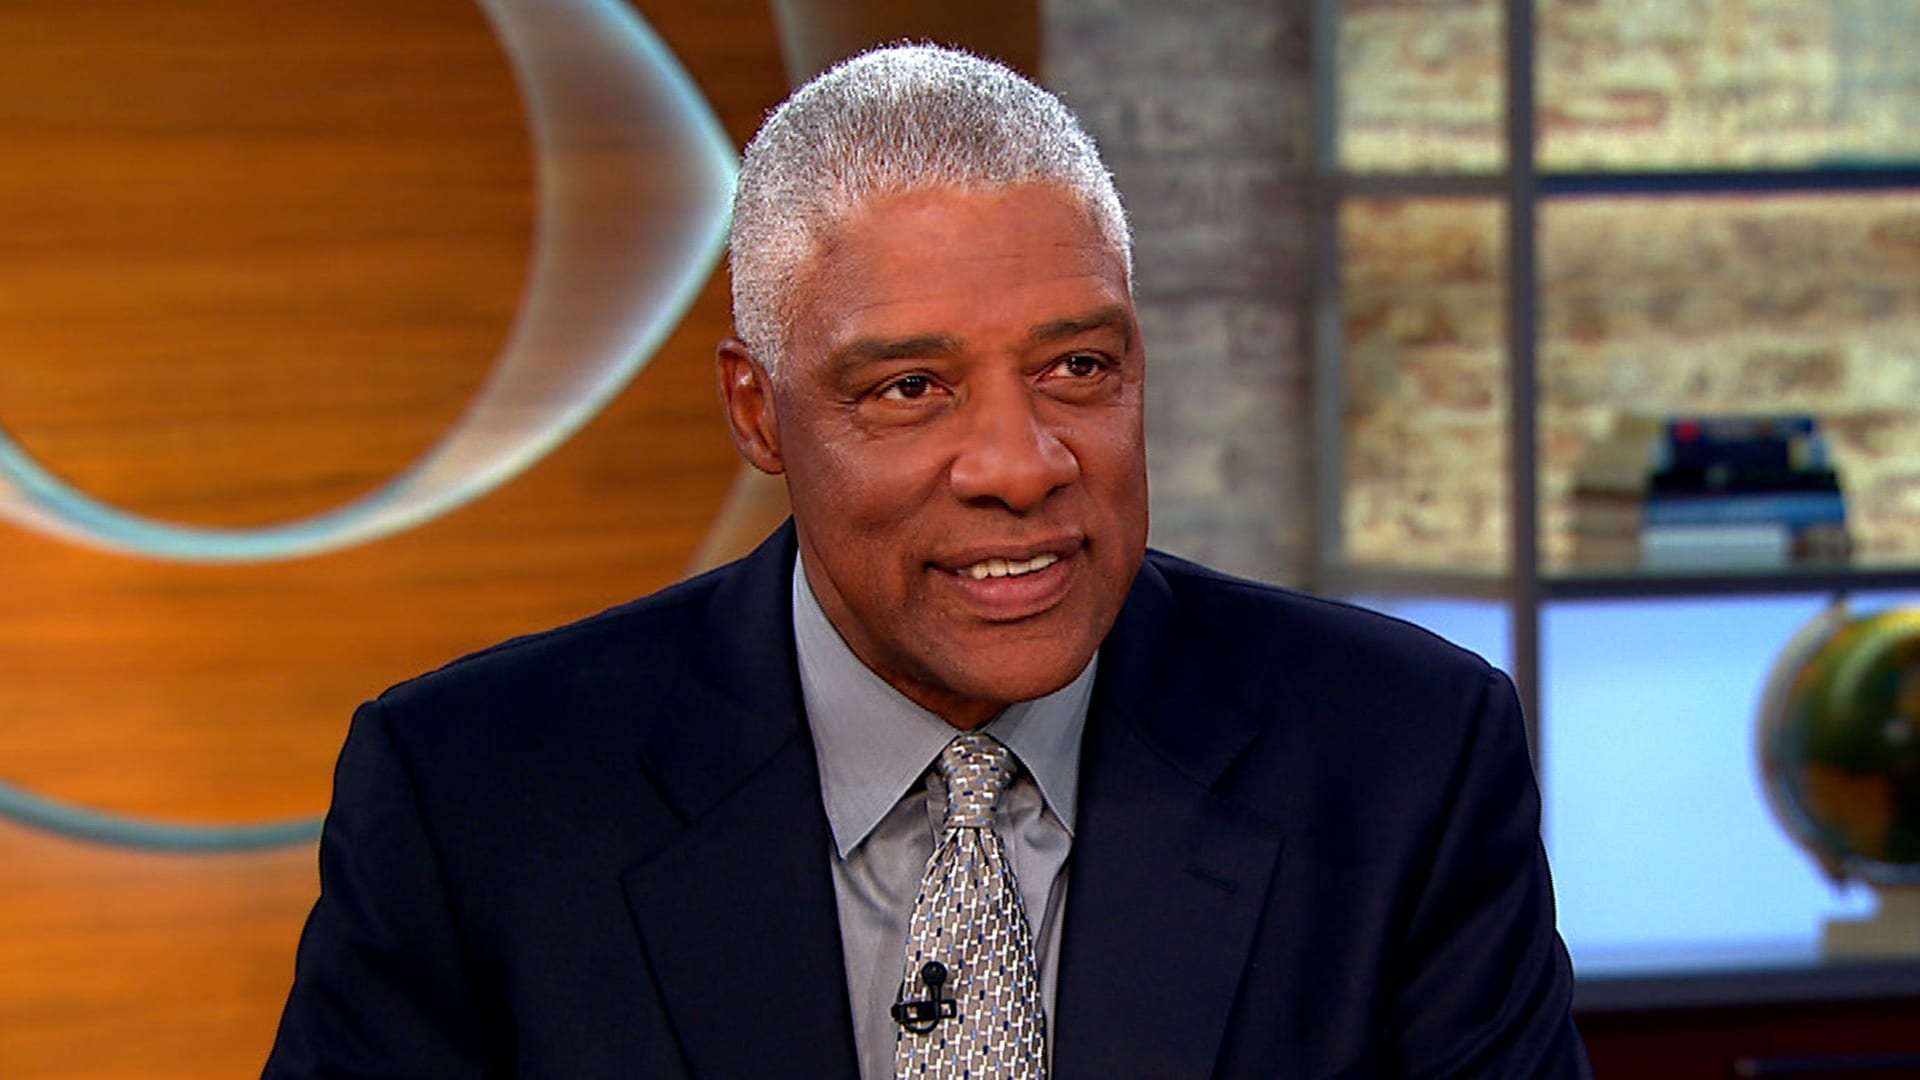 Dr. J Leaves LeBron James off His Top Two All-Time NBA Teams